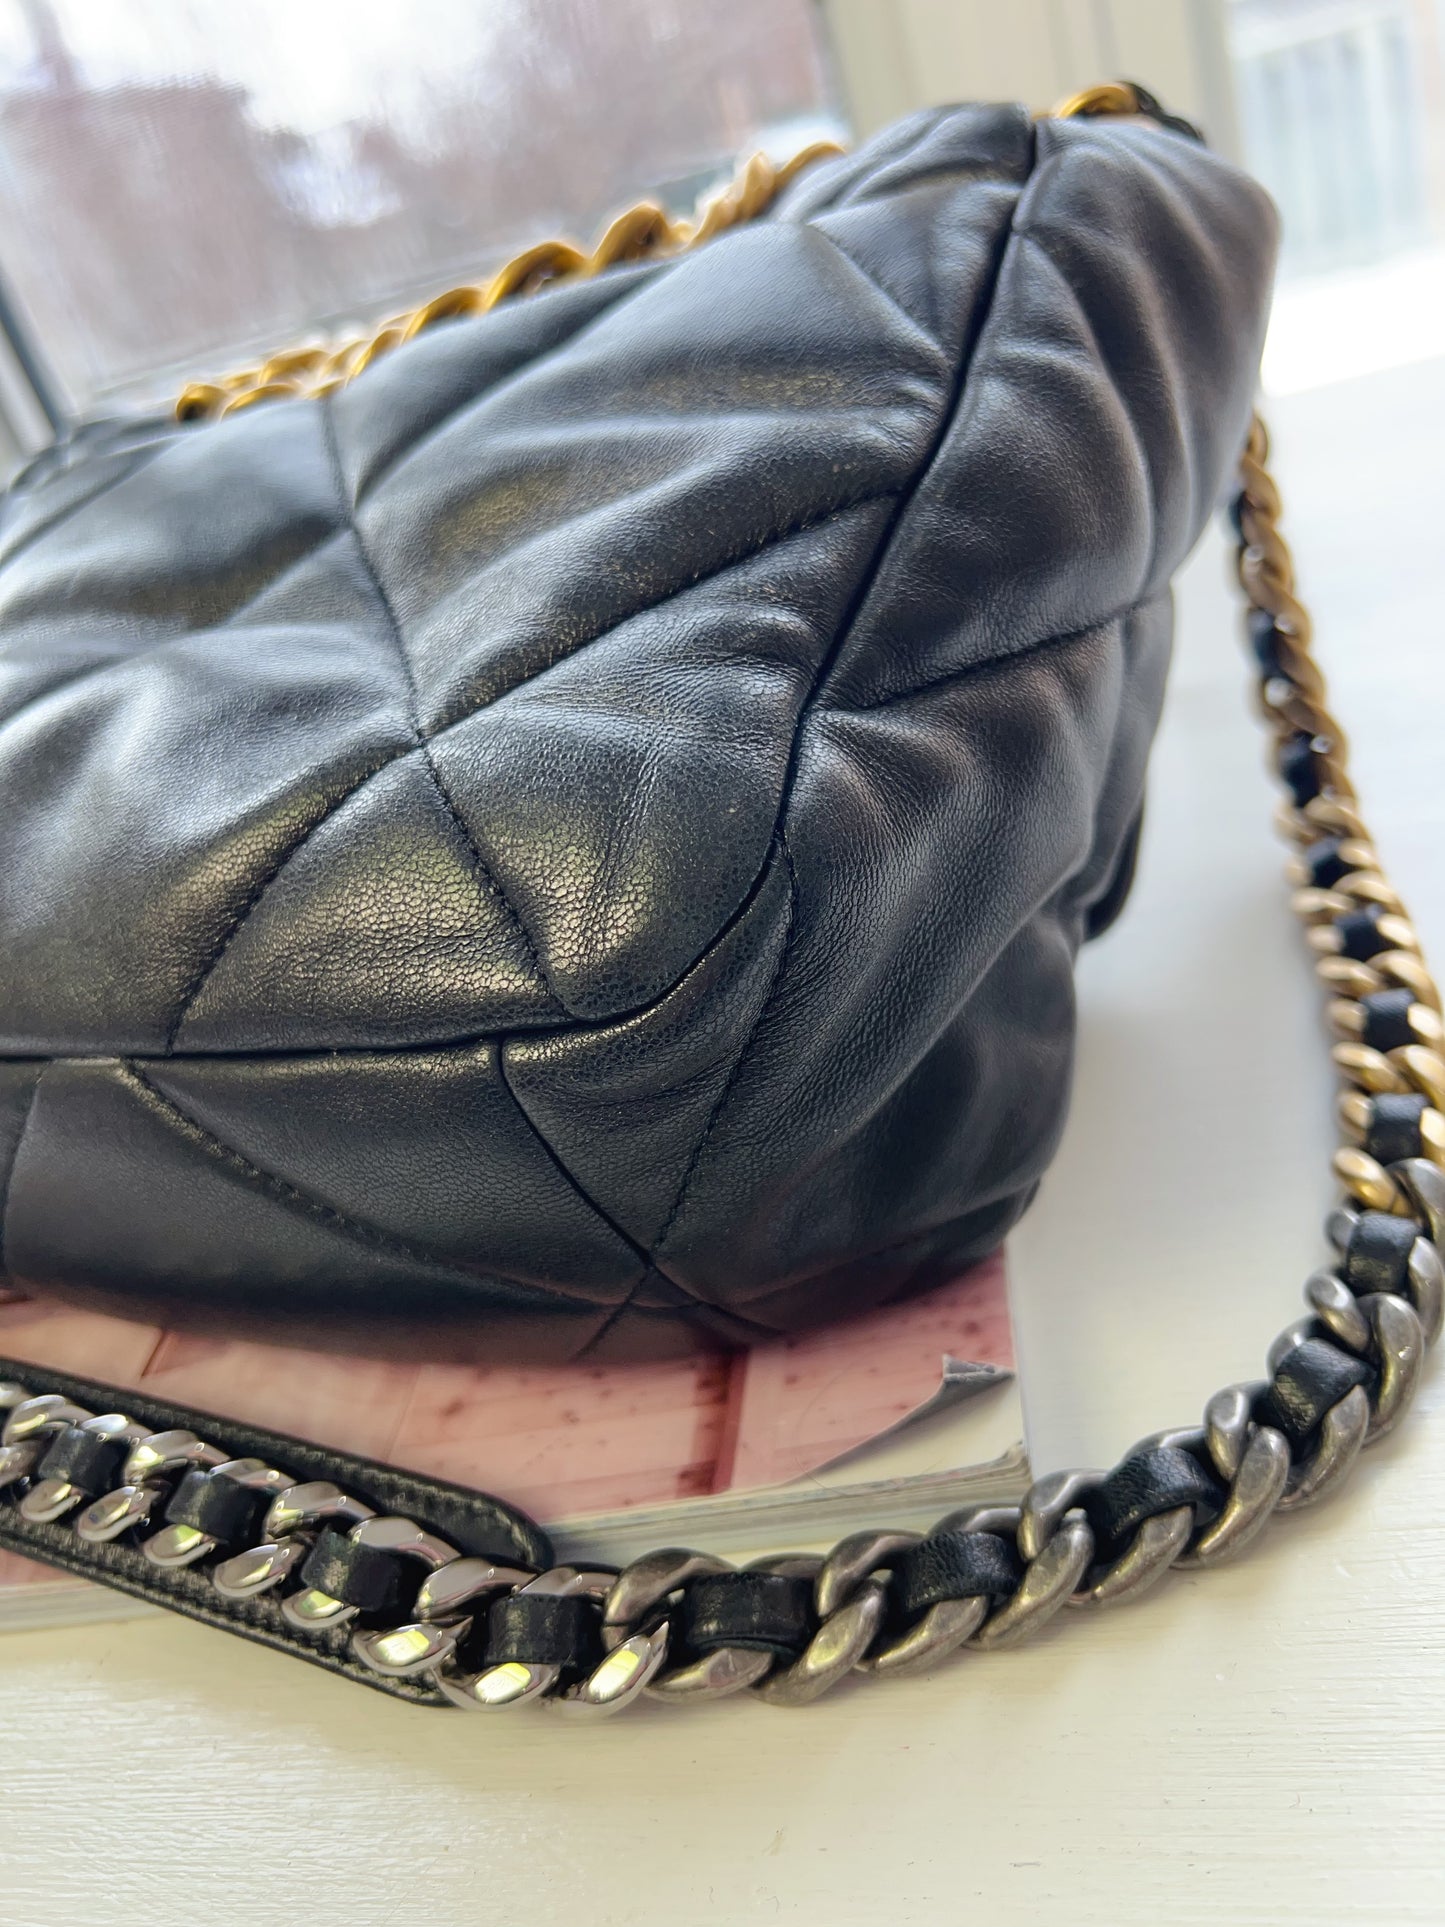 Chanel Leather Quilted Chanel 19 Flap Black